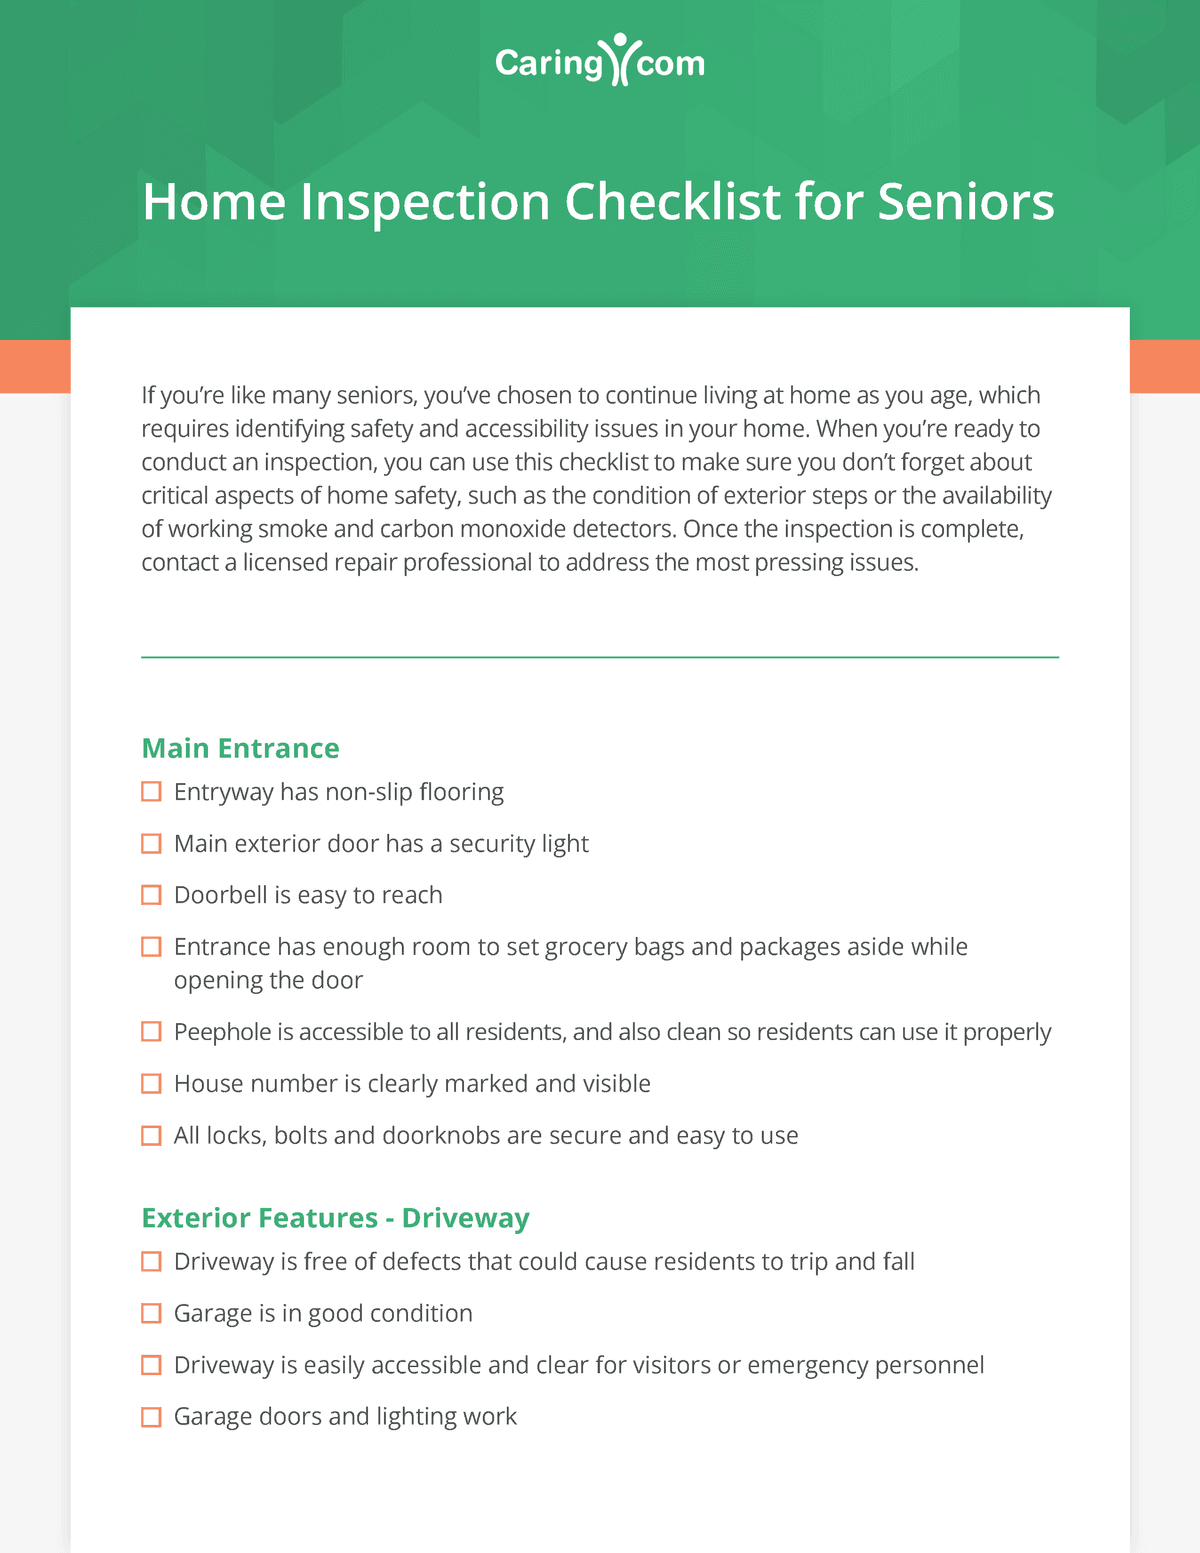 Your Home Safety Inspection Checklist